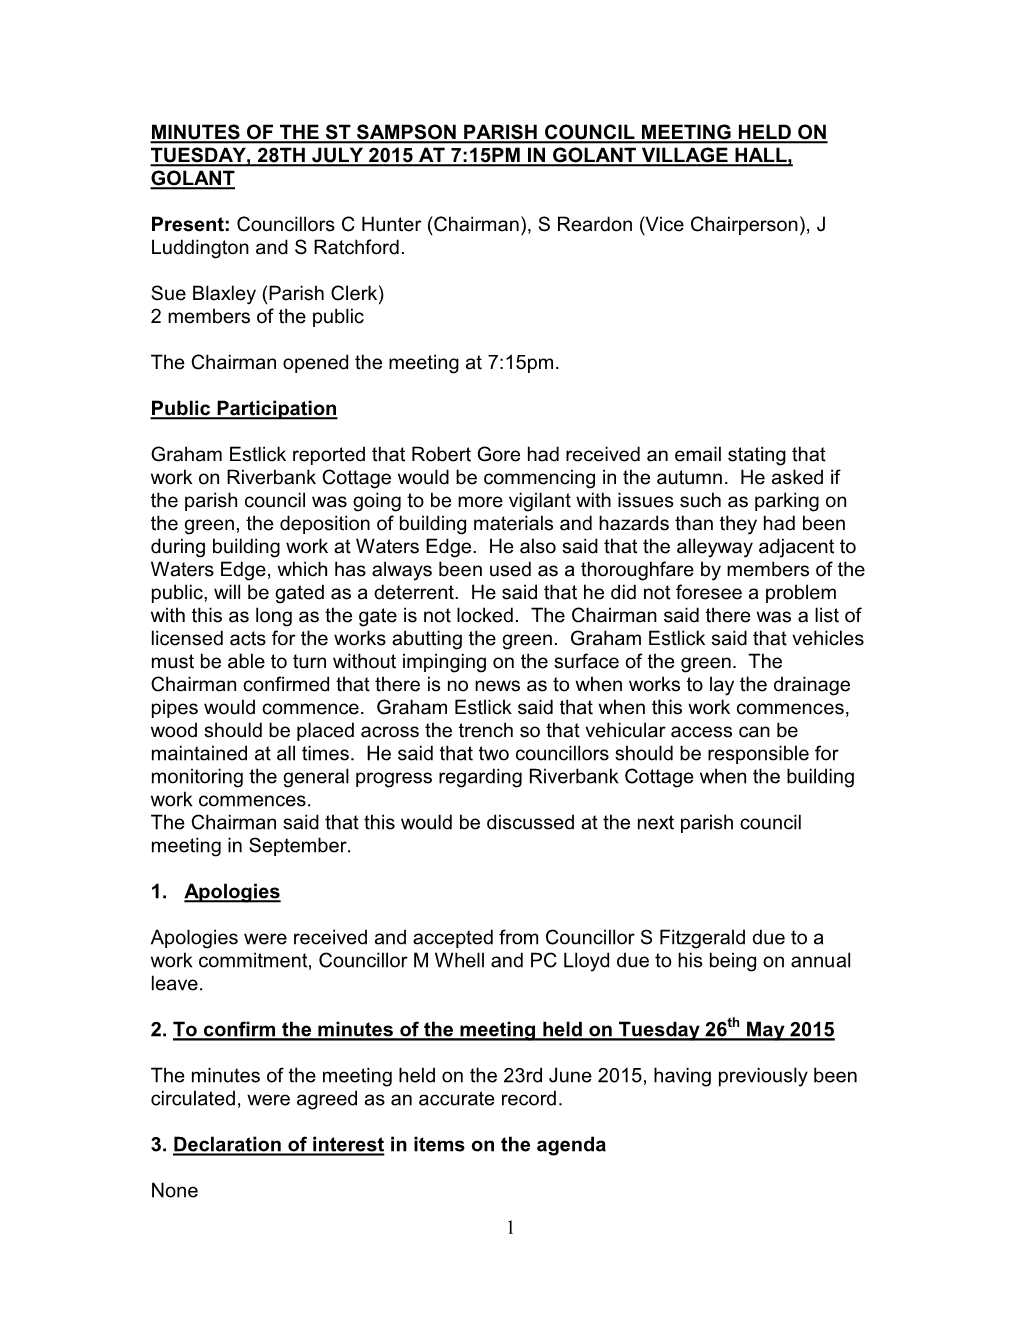 Minutes of the St Sampson Parish Council Meeting Held on Tuesday, 28Th July 2015 at 7:15Pm in Golant Village Hall, Golant